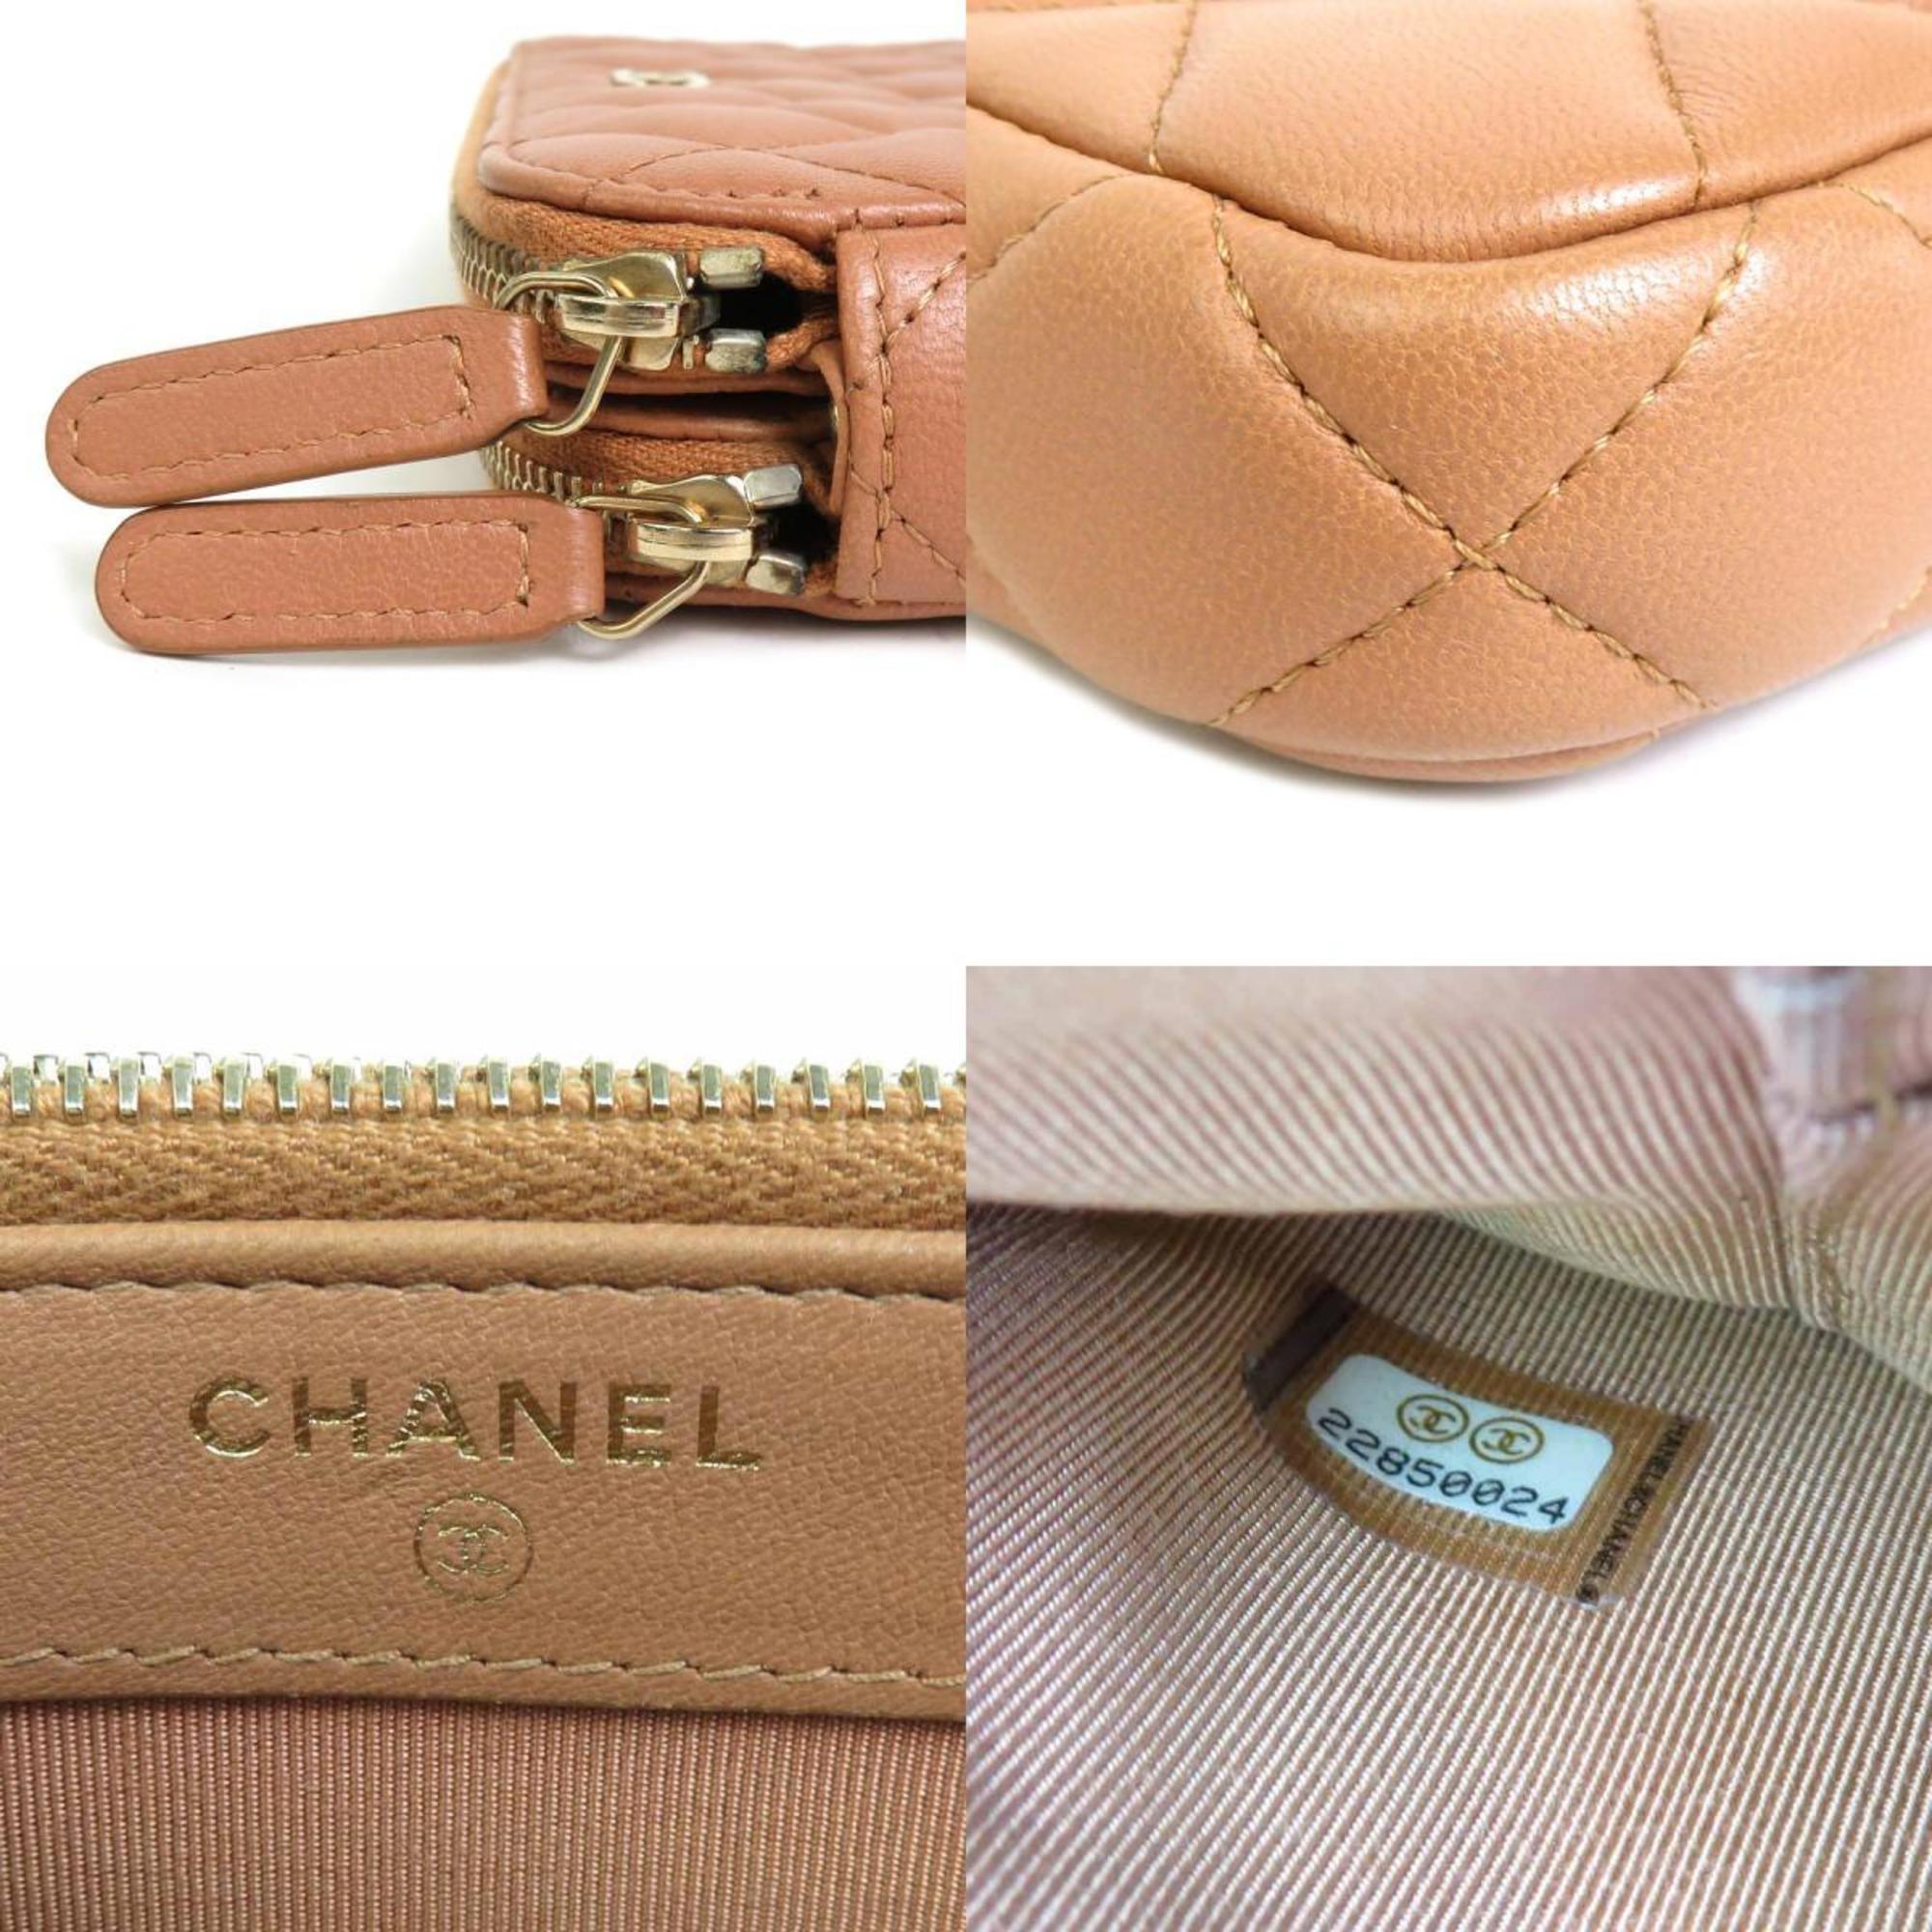 CHANEL Wallet Chain Matelasse Leather/Metal Pink Brown/Gold Ladies